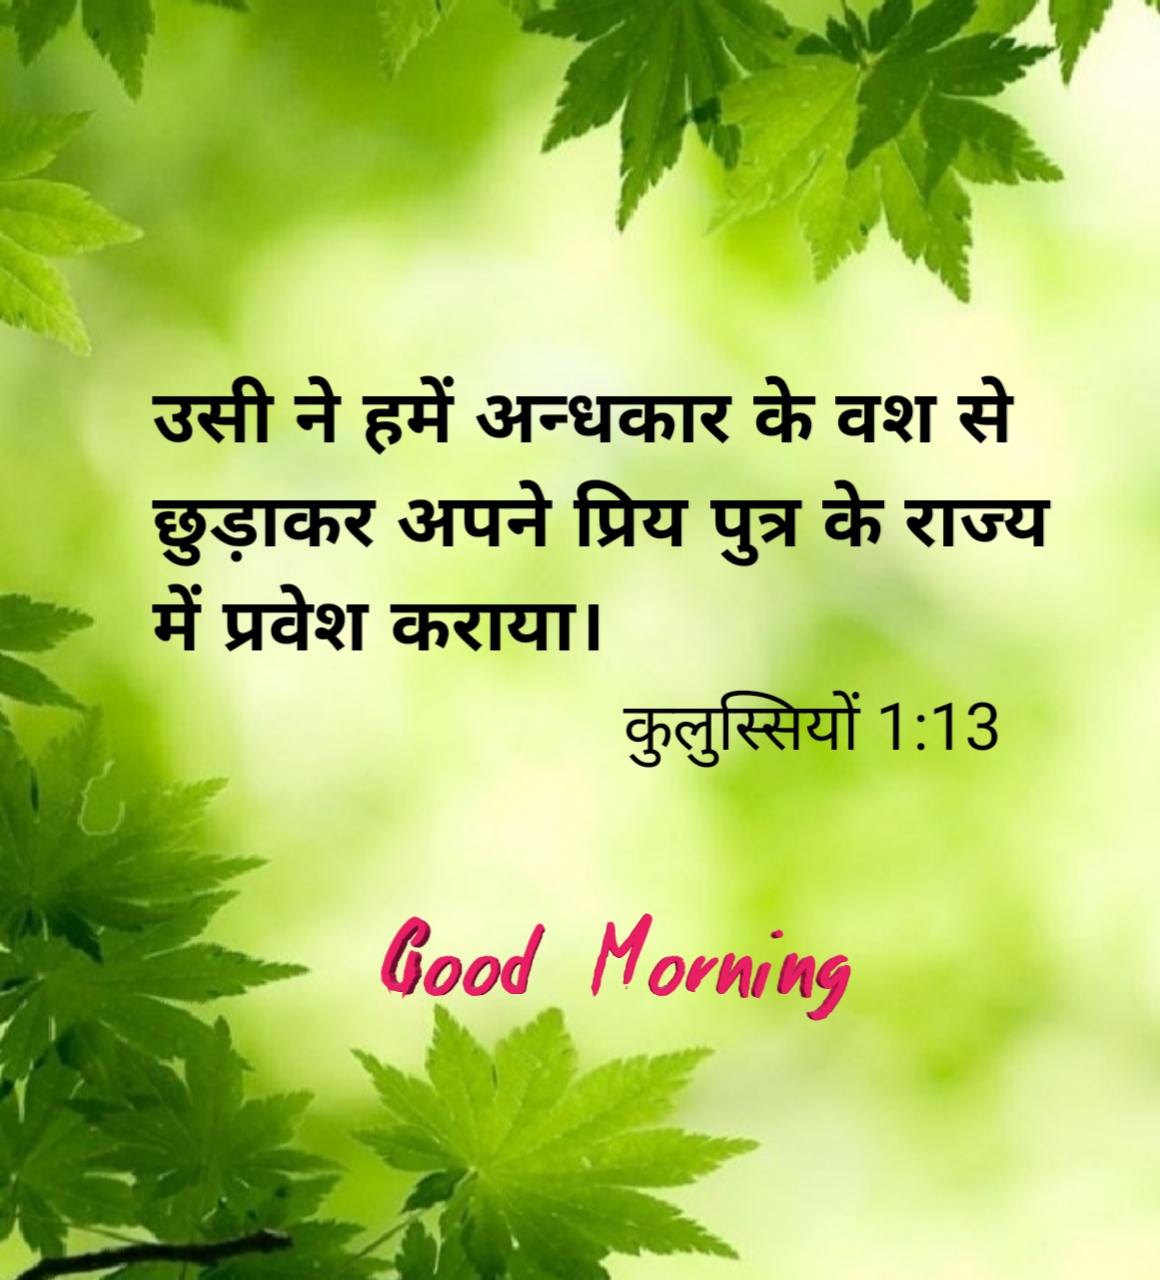 Good morning bible verse quotes images in hindi